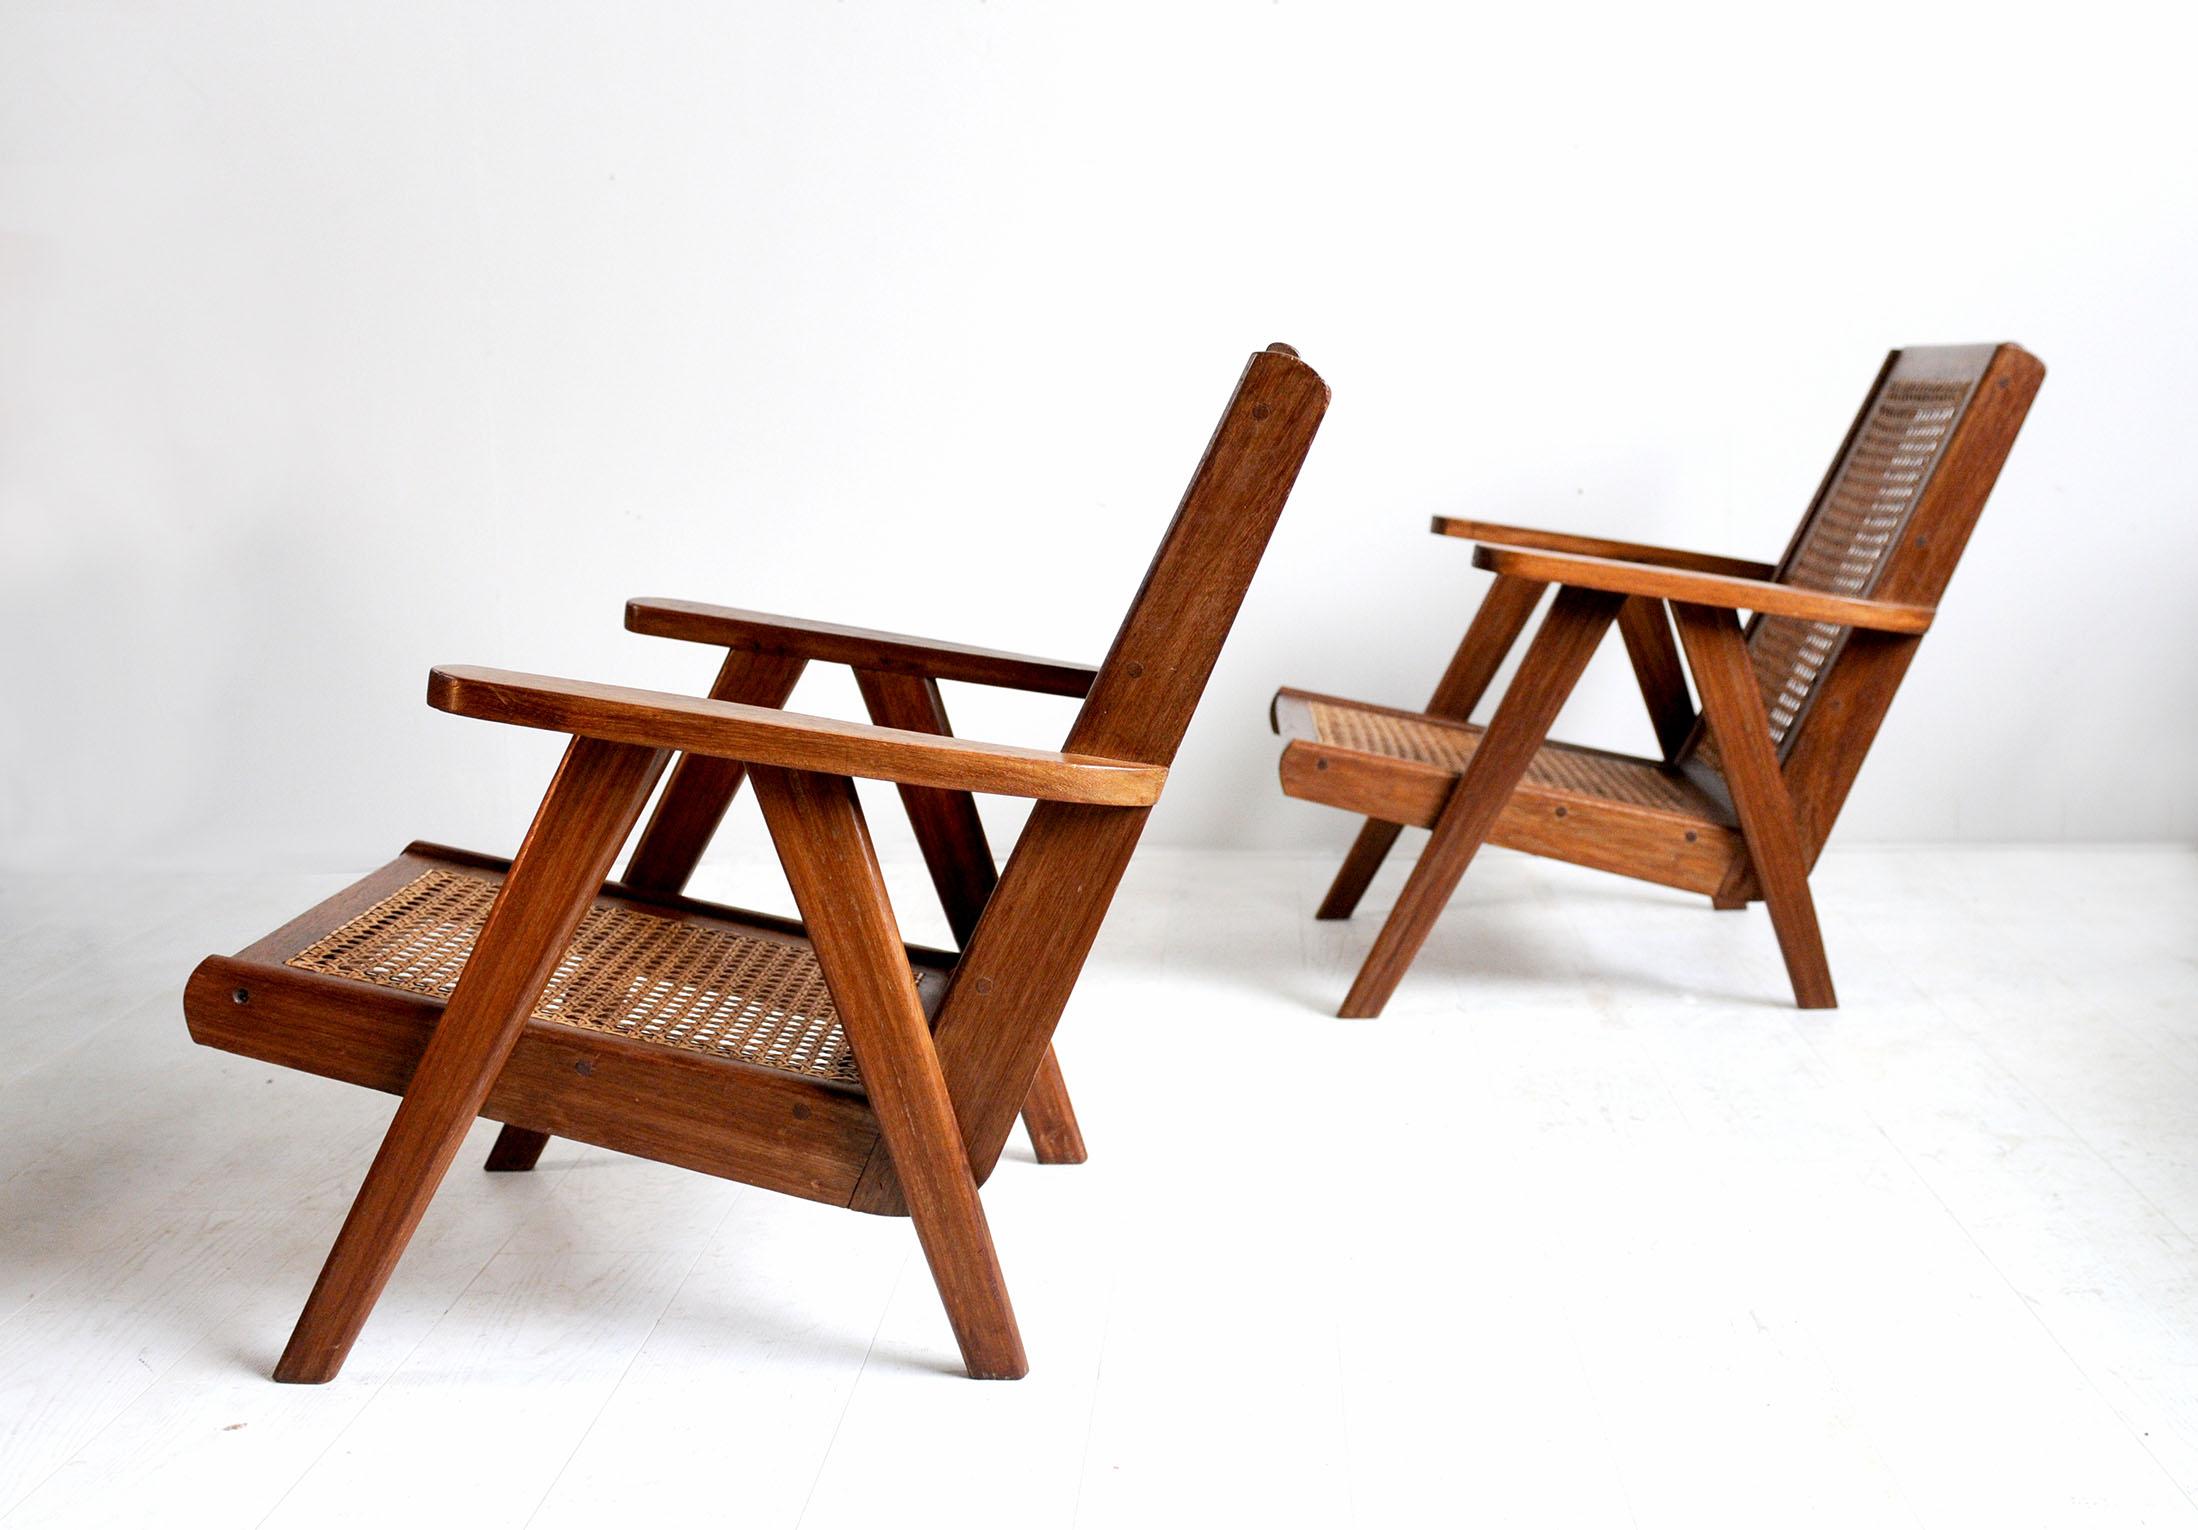 Pair of modernist armchairs in solid teak, cane seat and backrest, Congo, 1950. The boomerang-shaped seat rests on a compass base surmounted by a wide armrest.
Very good condition, cane refurbished.